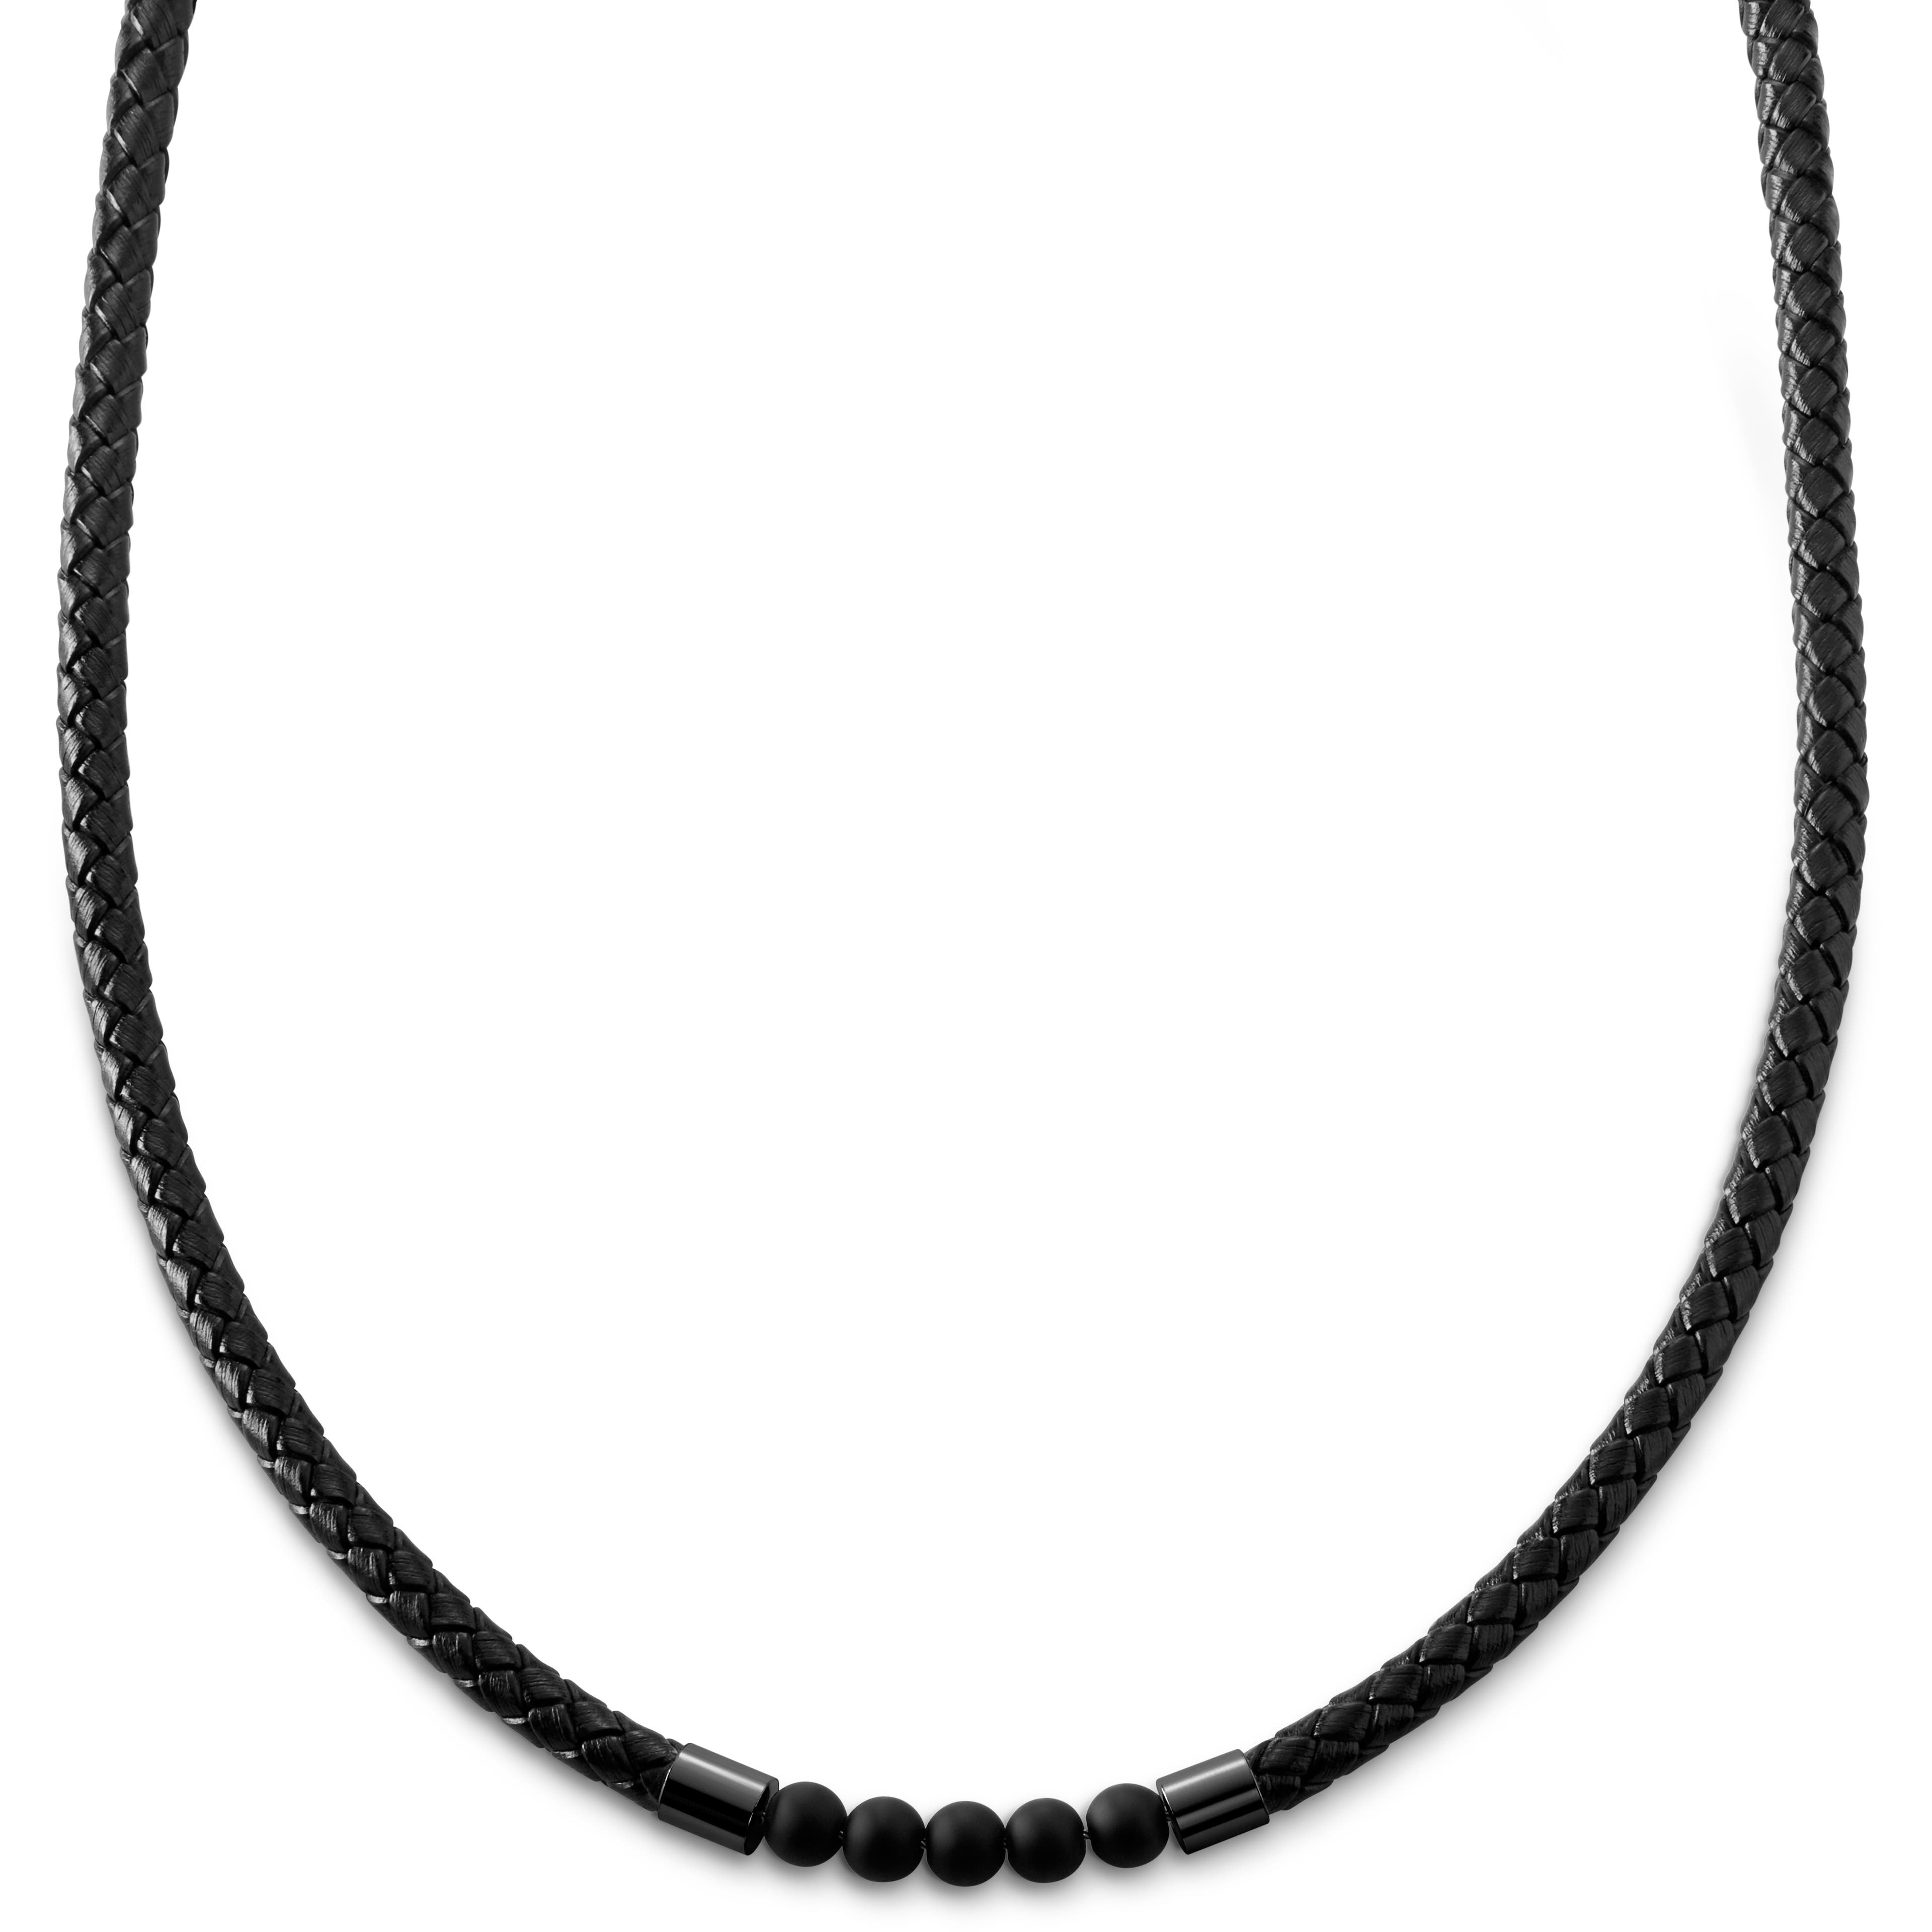 Tenvis | 1/5" (5 mm) Black Onyx Leather Necklace